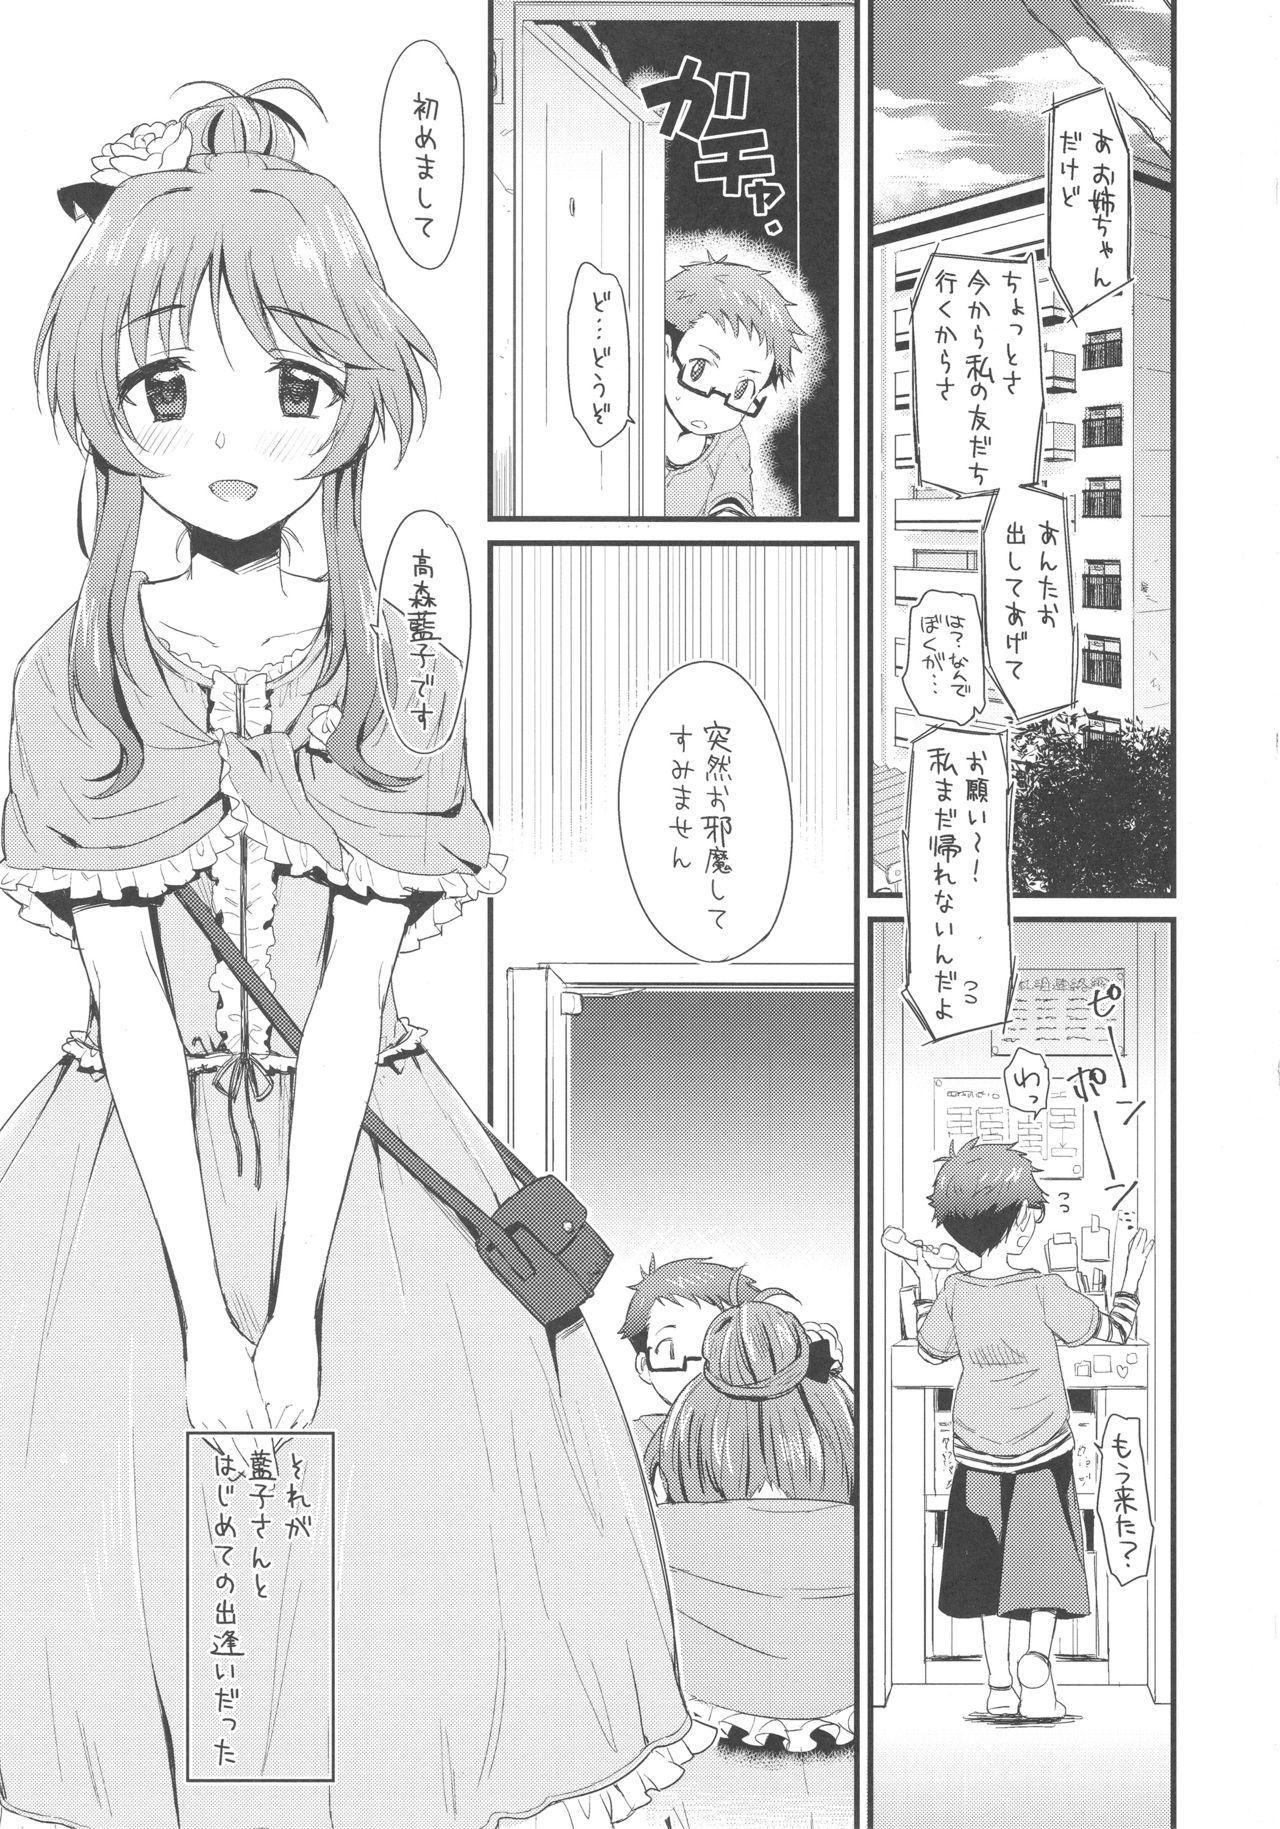 Step Brother Hajimete no Hito - The idolmaster Chacal - Page 2